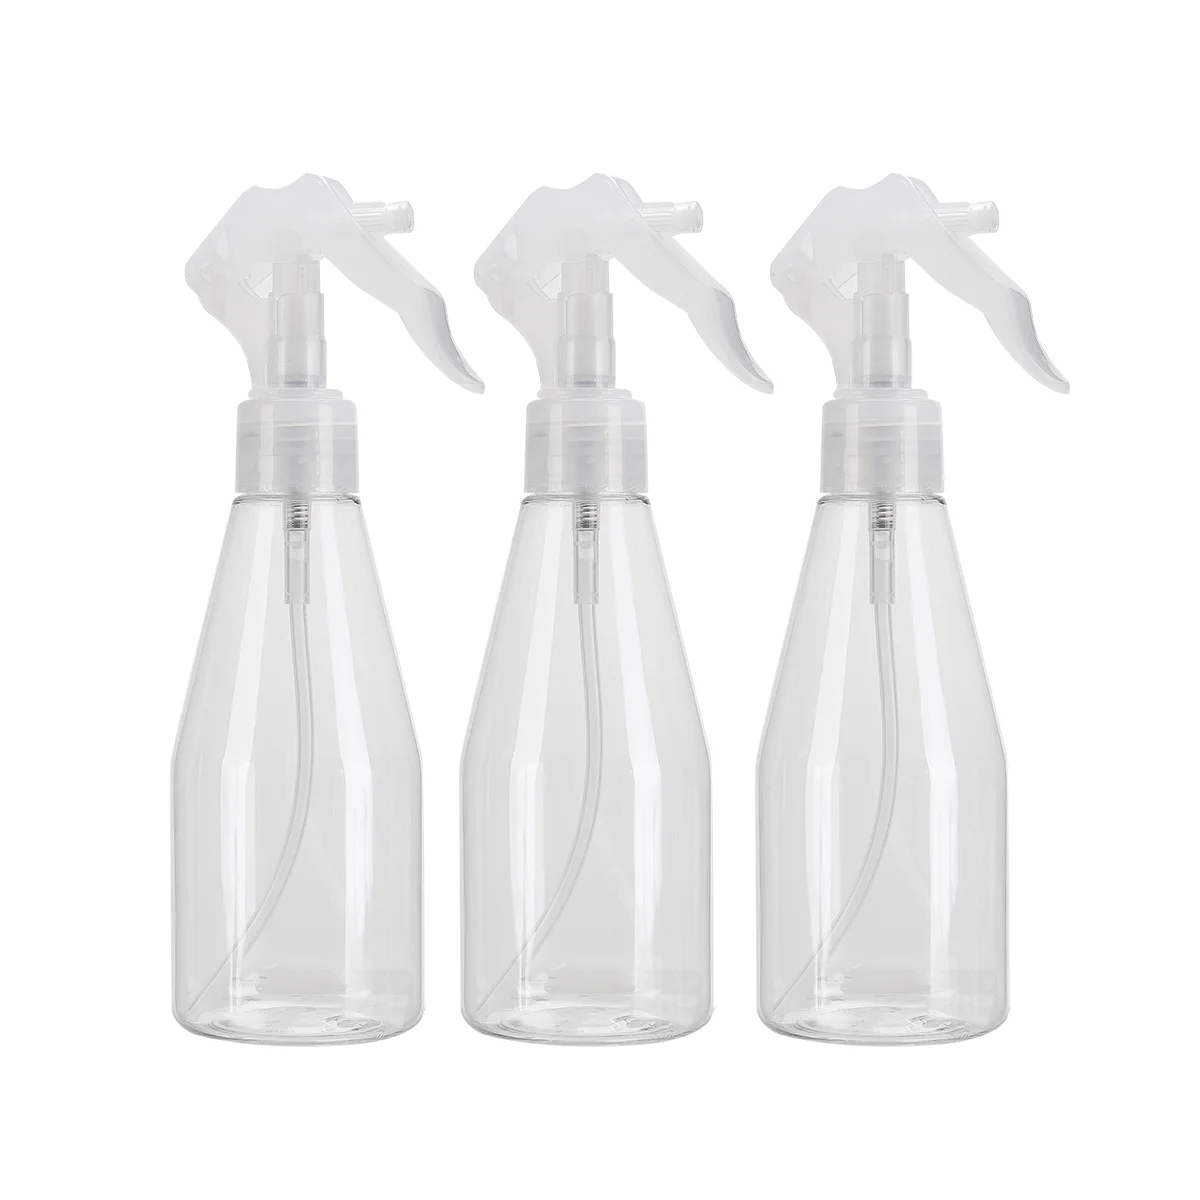 3 Pcs Spray Bottles For Hair Plastic 200ml Bottles Safe Odorless Sprayer Leak-proof Great for Cleaning Products Garden Beauty 1pc punch free hair accessories storage box transparent dust proof wall mounted jewelry box for bathroom storage storage box